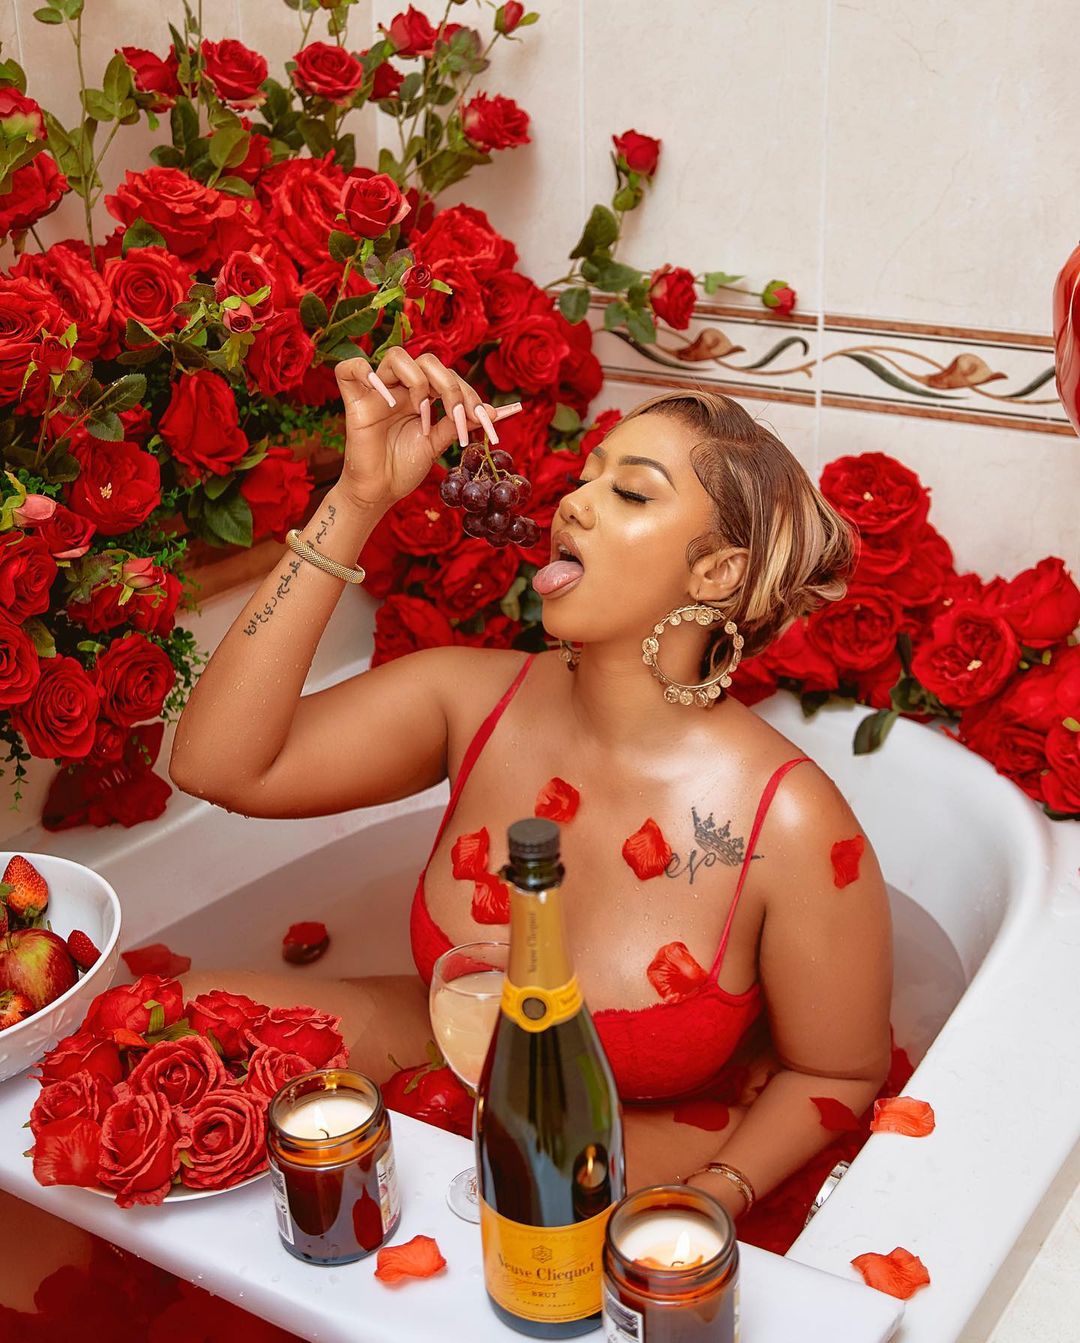 Valentine's Day: Hajia4Real Teases Fans With Sultry Bathroom Photos